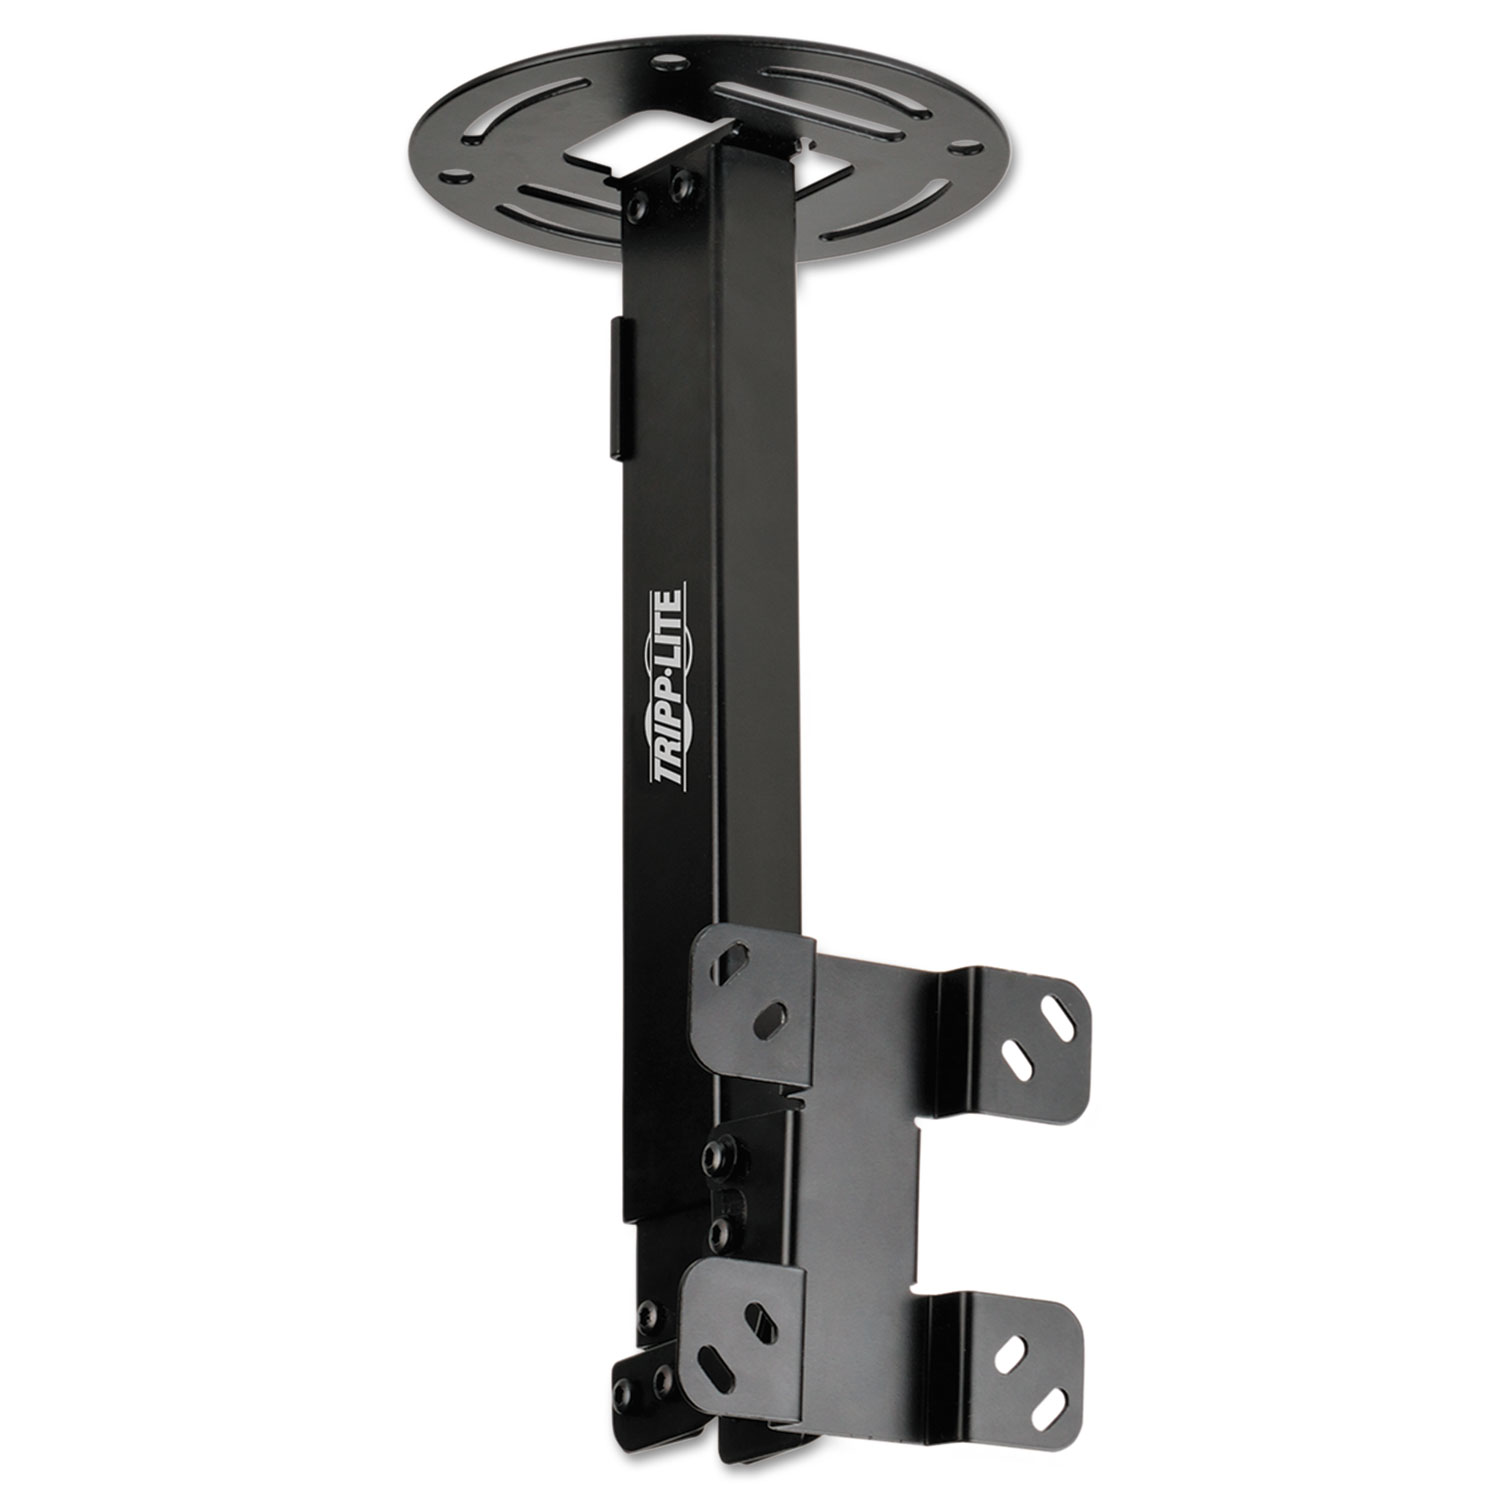 Ceiling Display/Projector Mount, Up to 37, Up to 80 lbs., Black